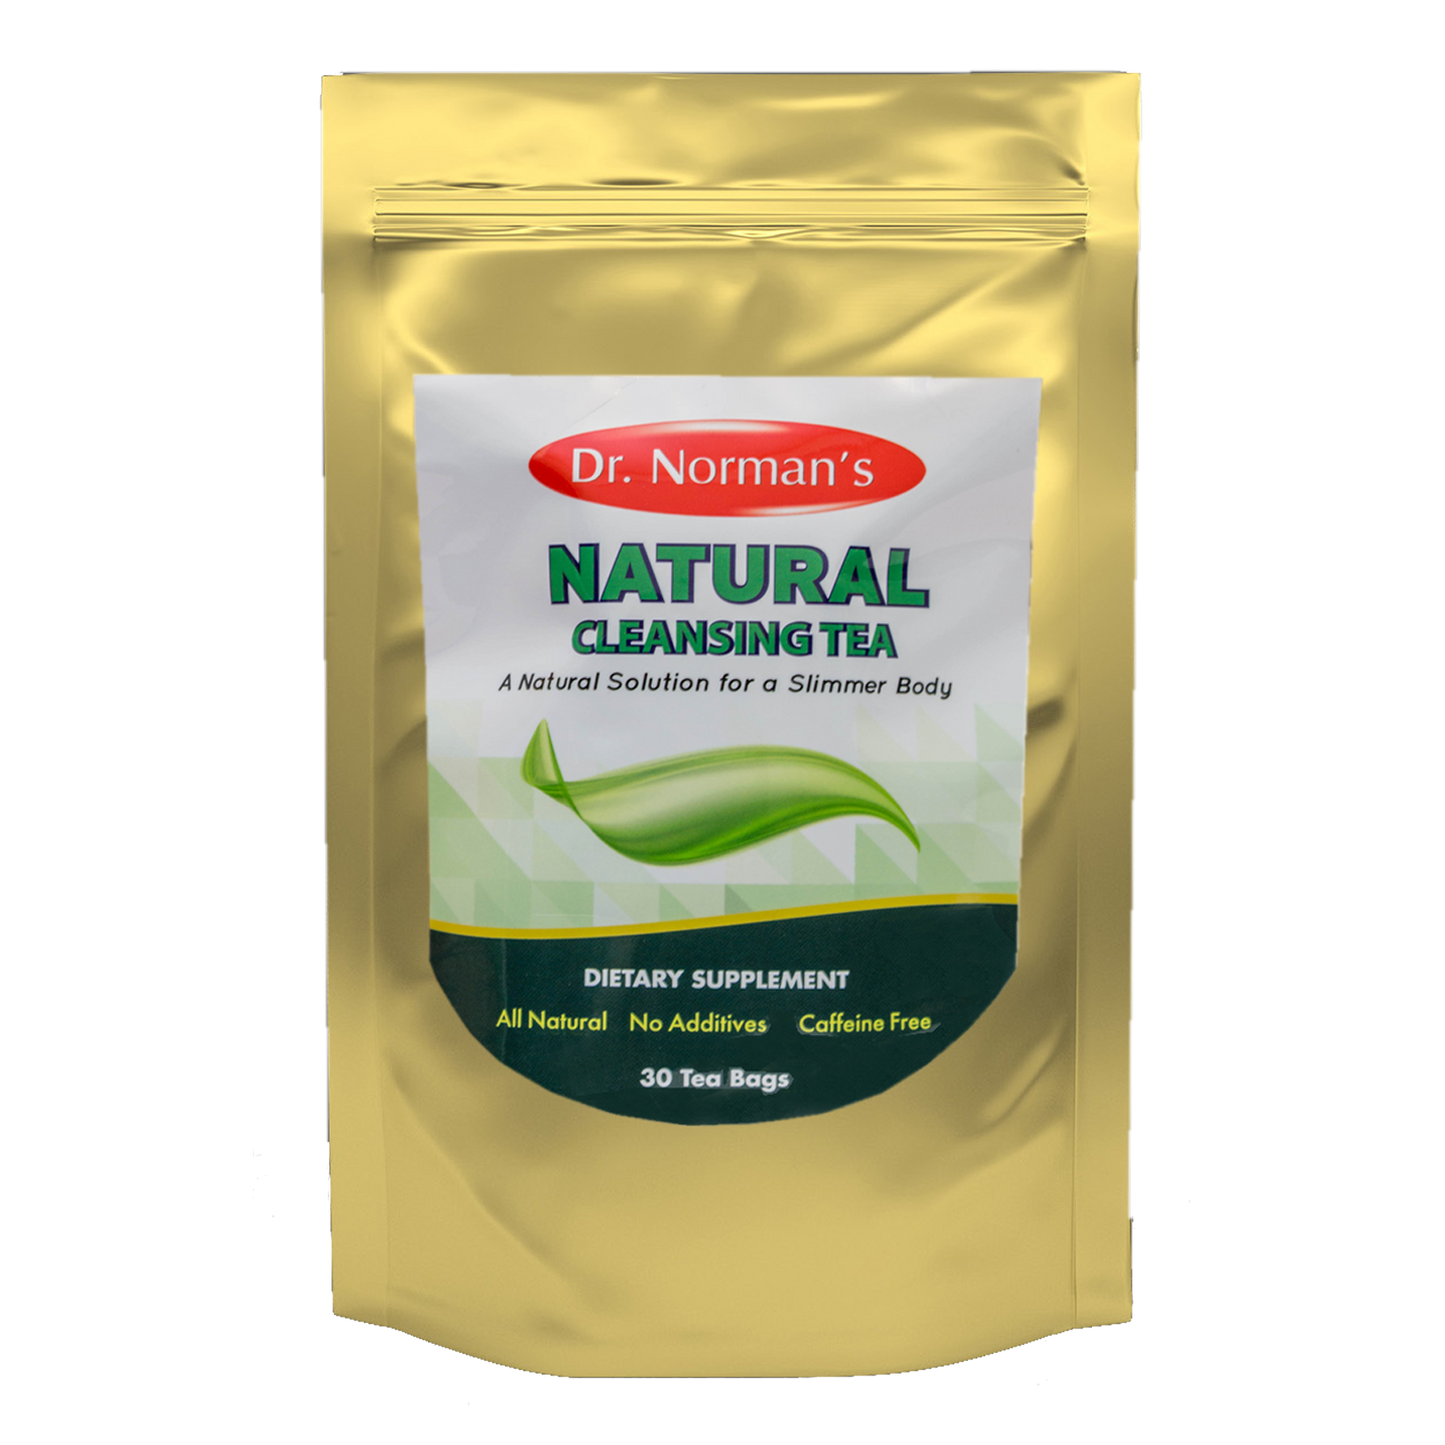 Dr. Norman's Natural Cleansing Tea